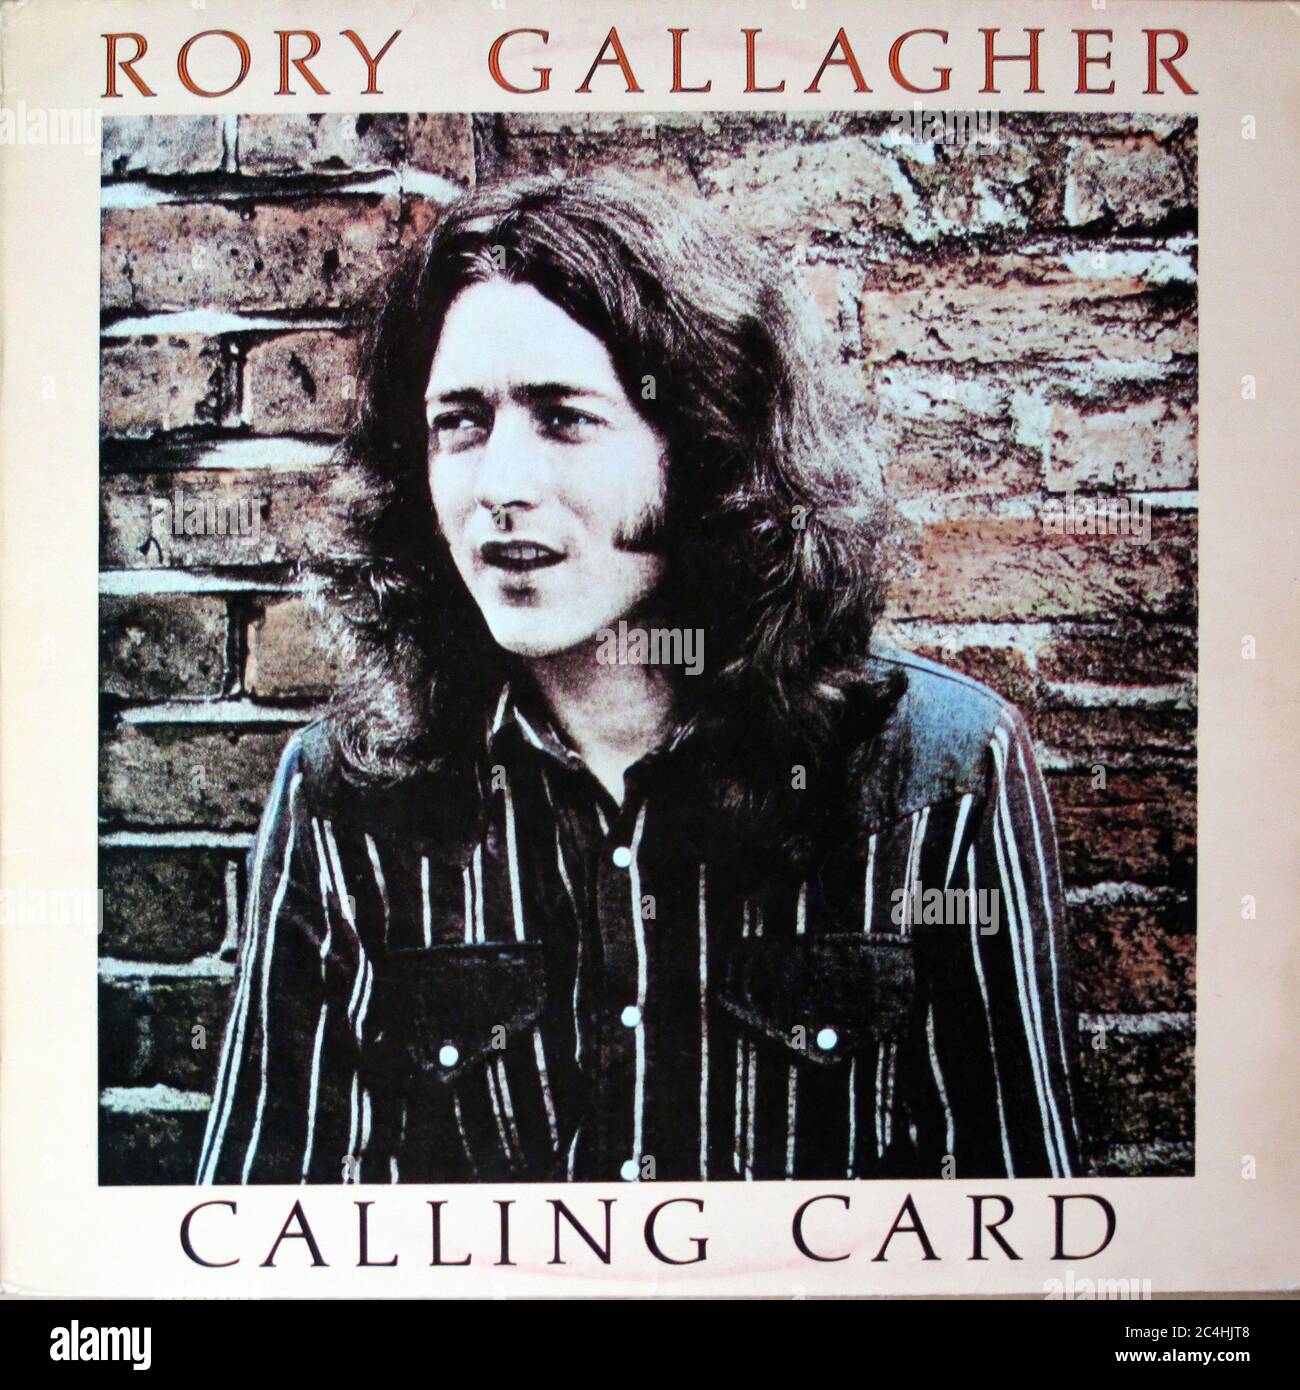 Rory Gallagher Calling Card Original   12'' Lp Vinyl - Vintage Record Cover Stock Photo